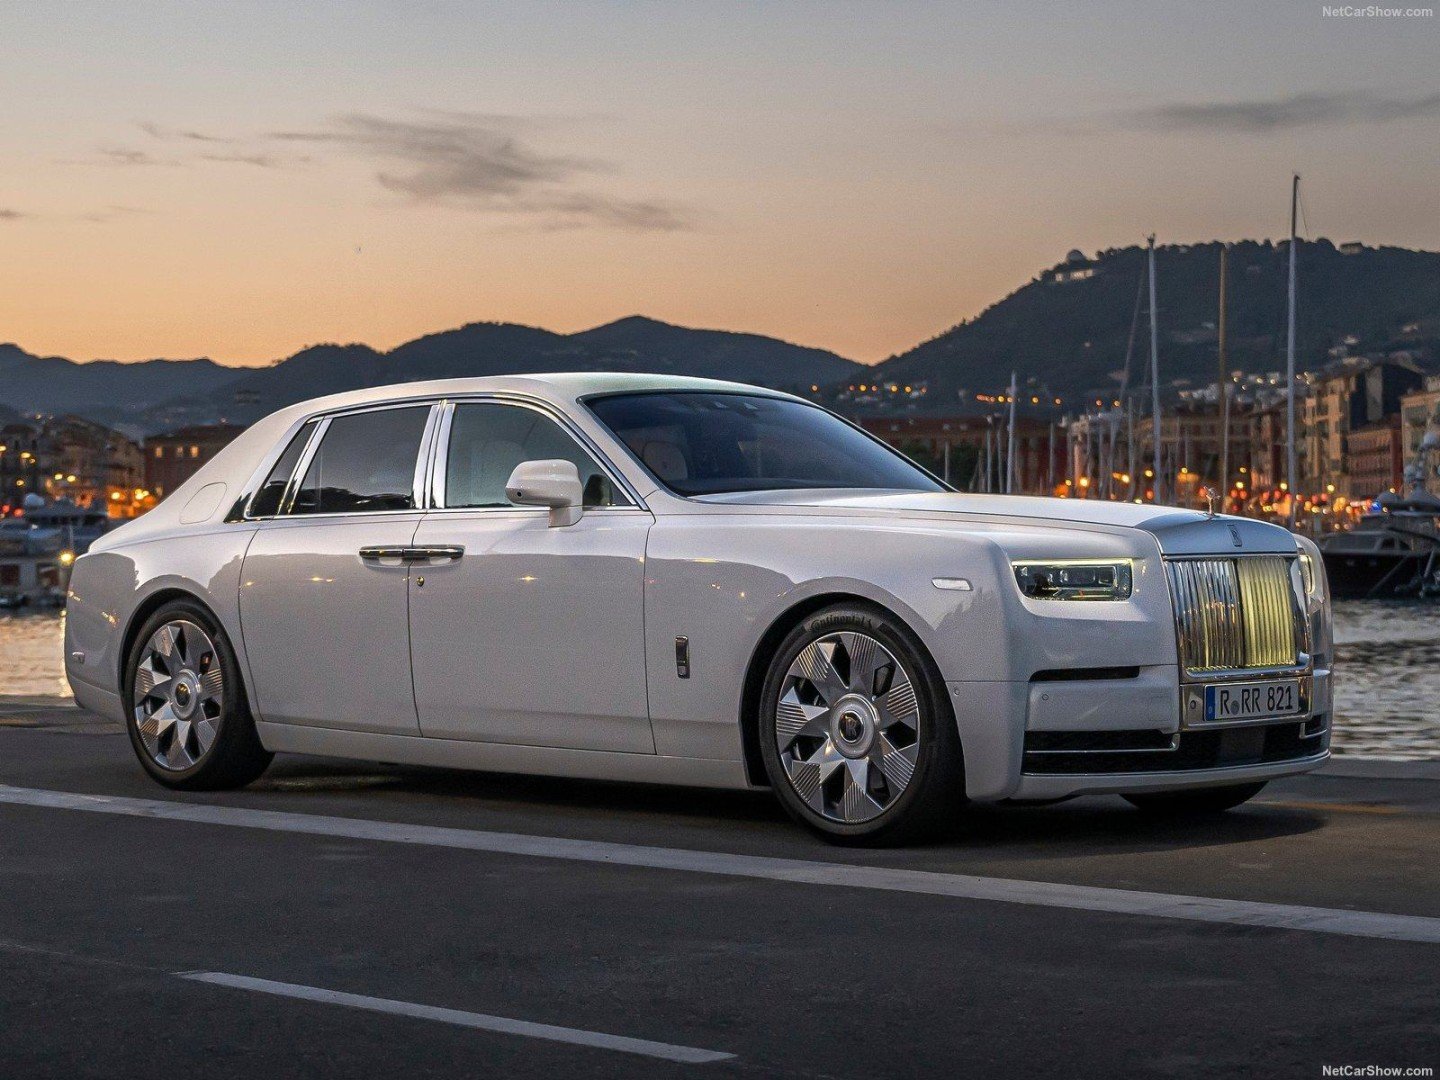 RollsRoyce LONRR Stock Price Could Triple in Best Case UBS Says   Bloomberg